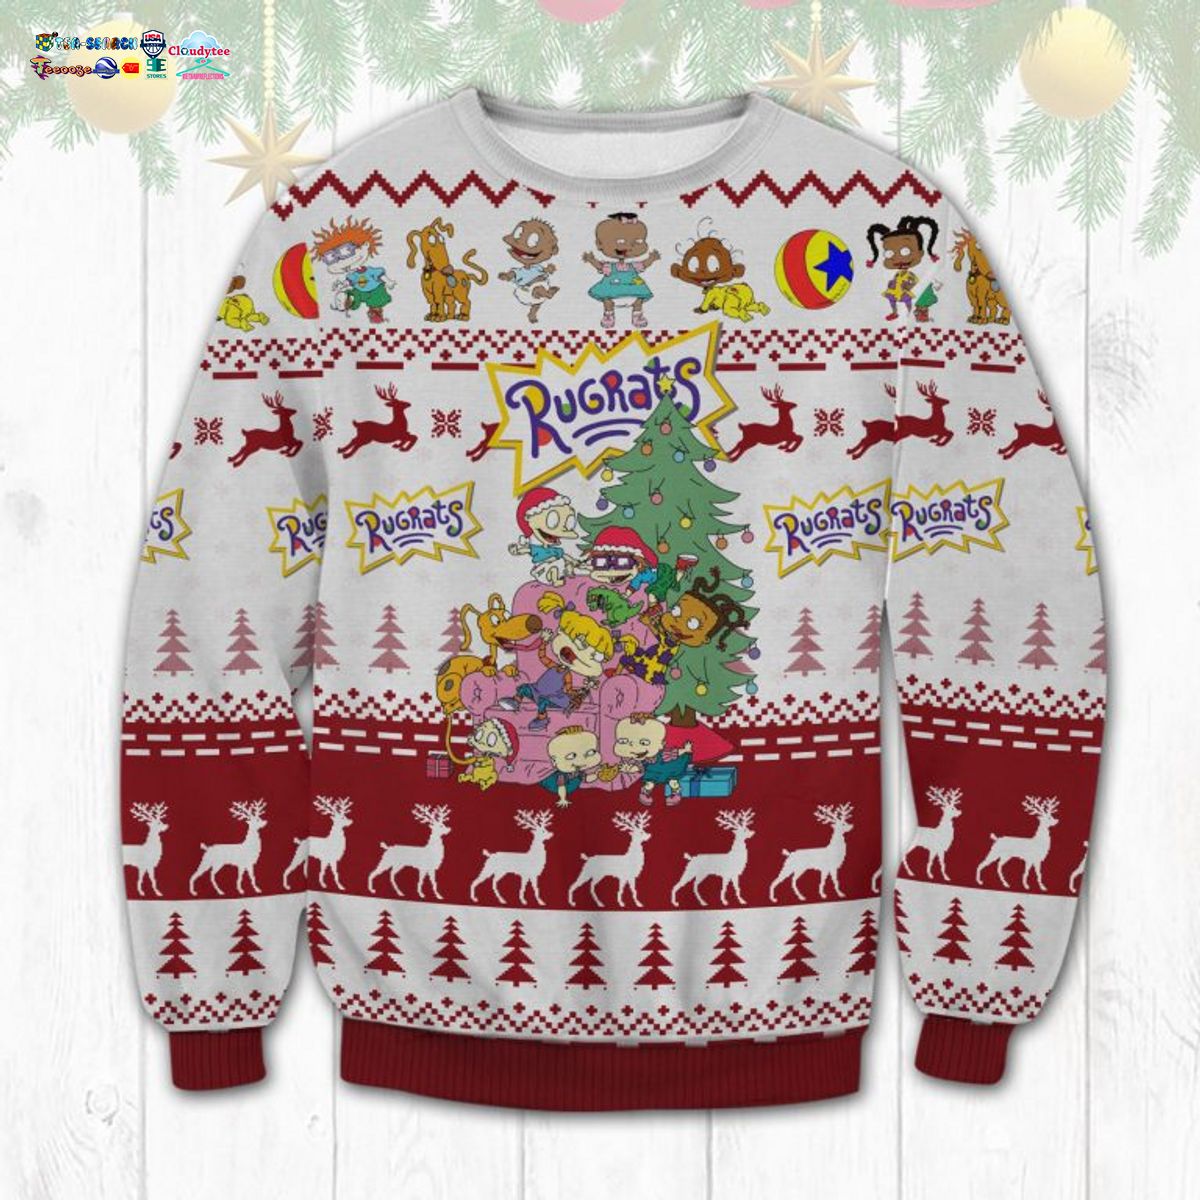 Rugrats Ugly Christmas Sweater - Wow! This is gracious